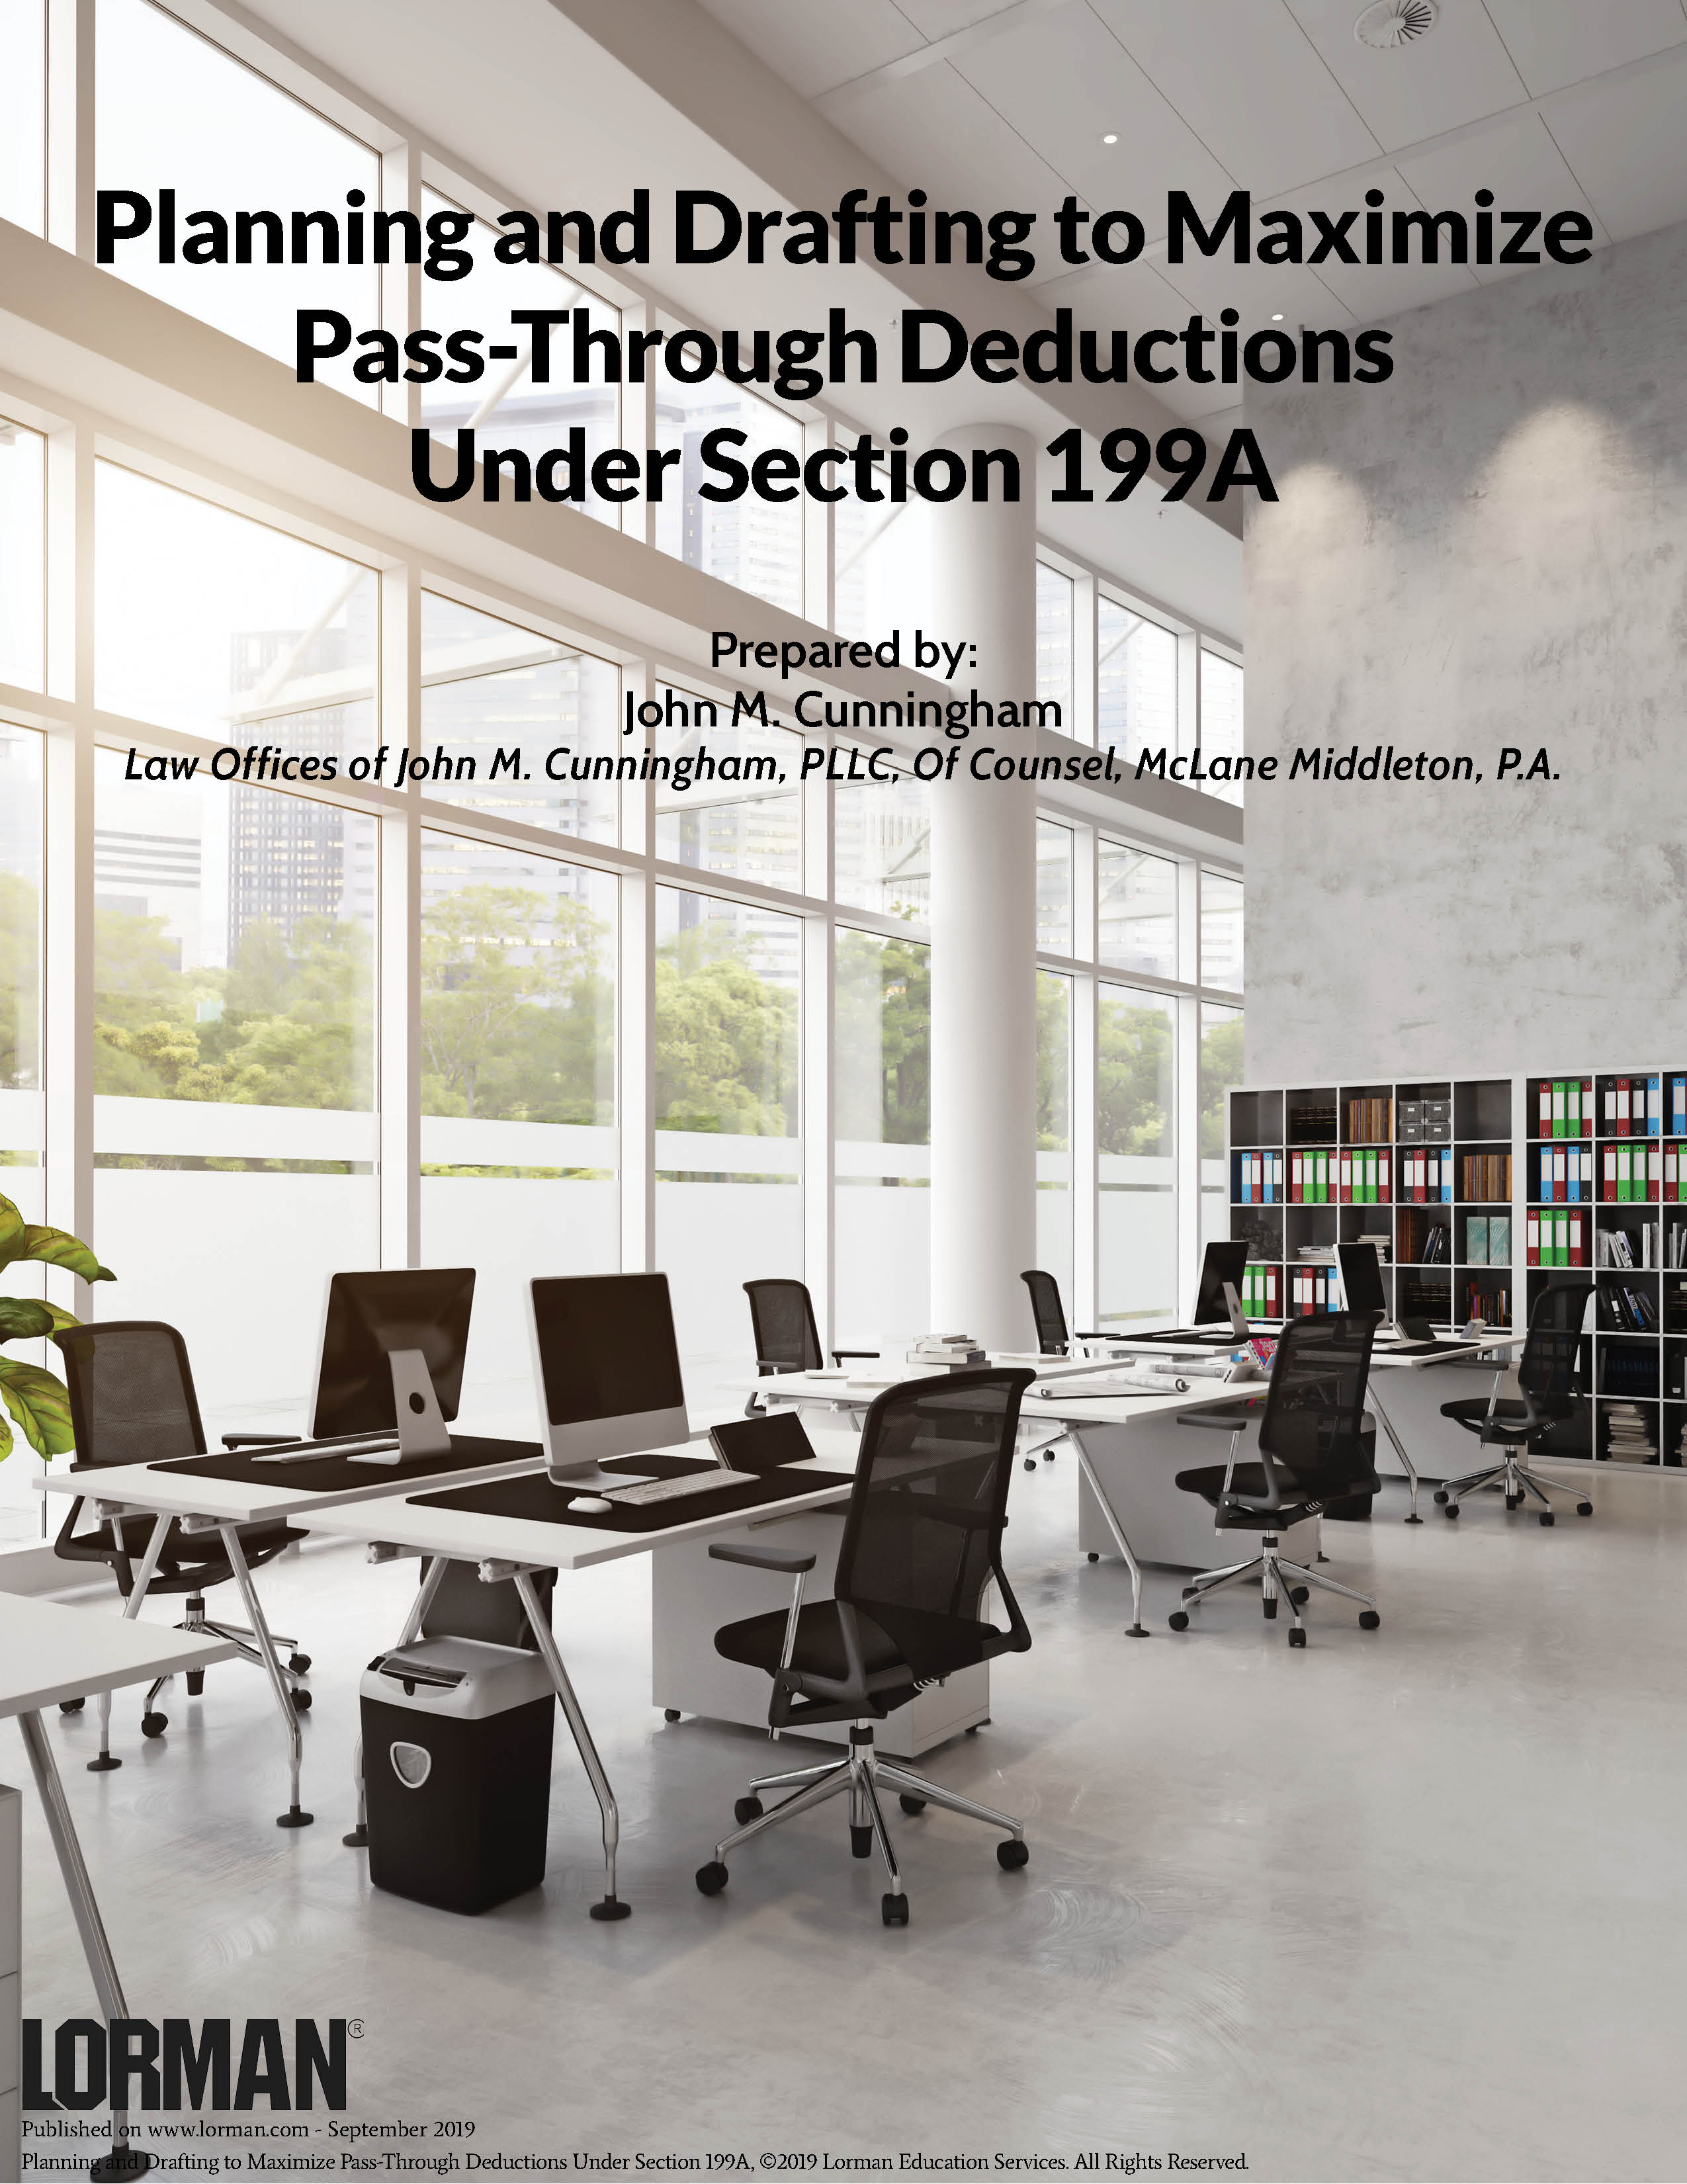 Planning and Drafting to Maximize Pass-Through Deductions Under Section 199A